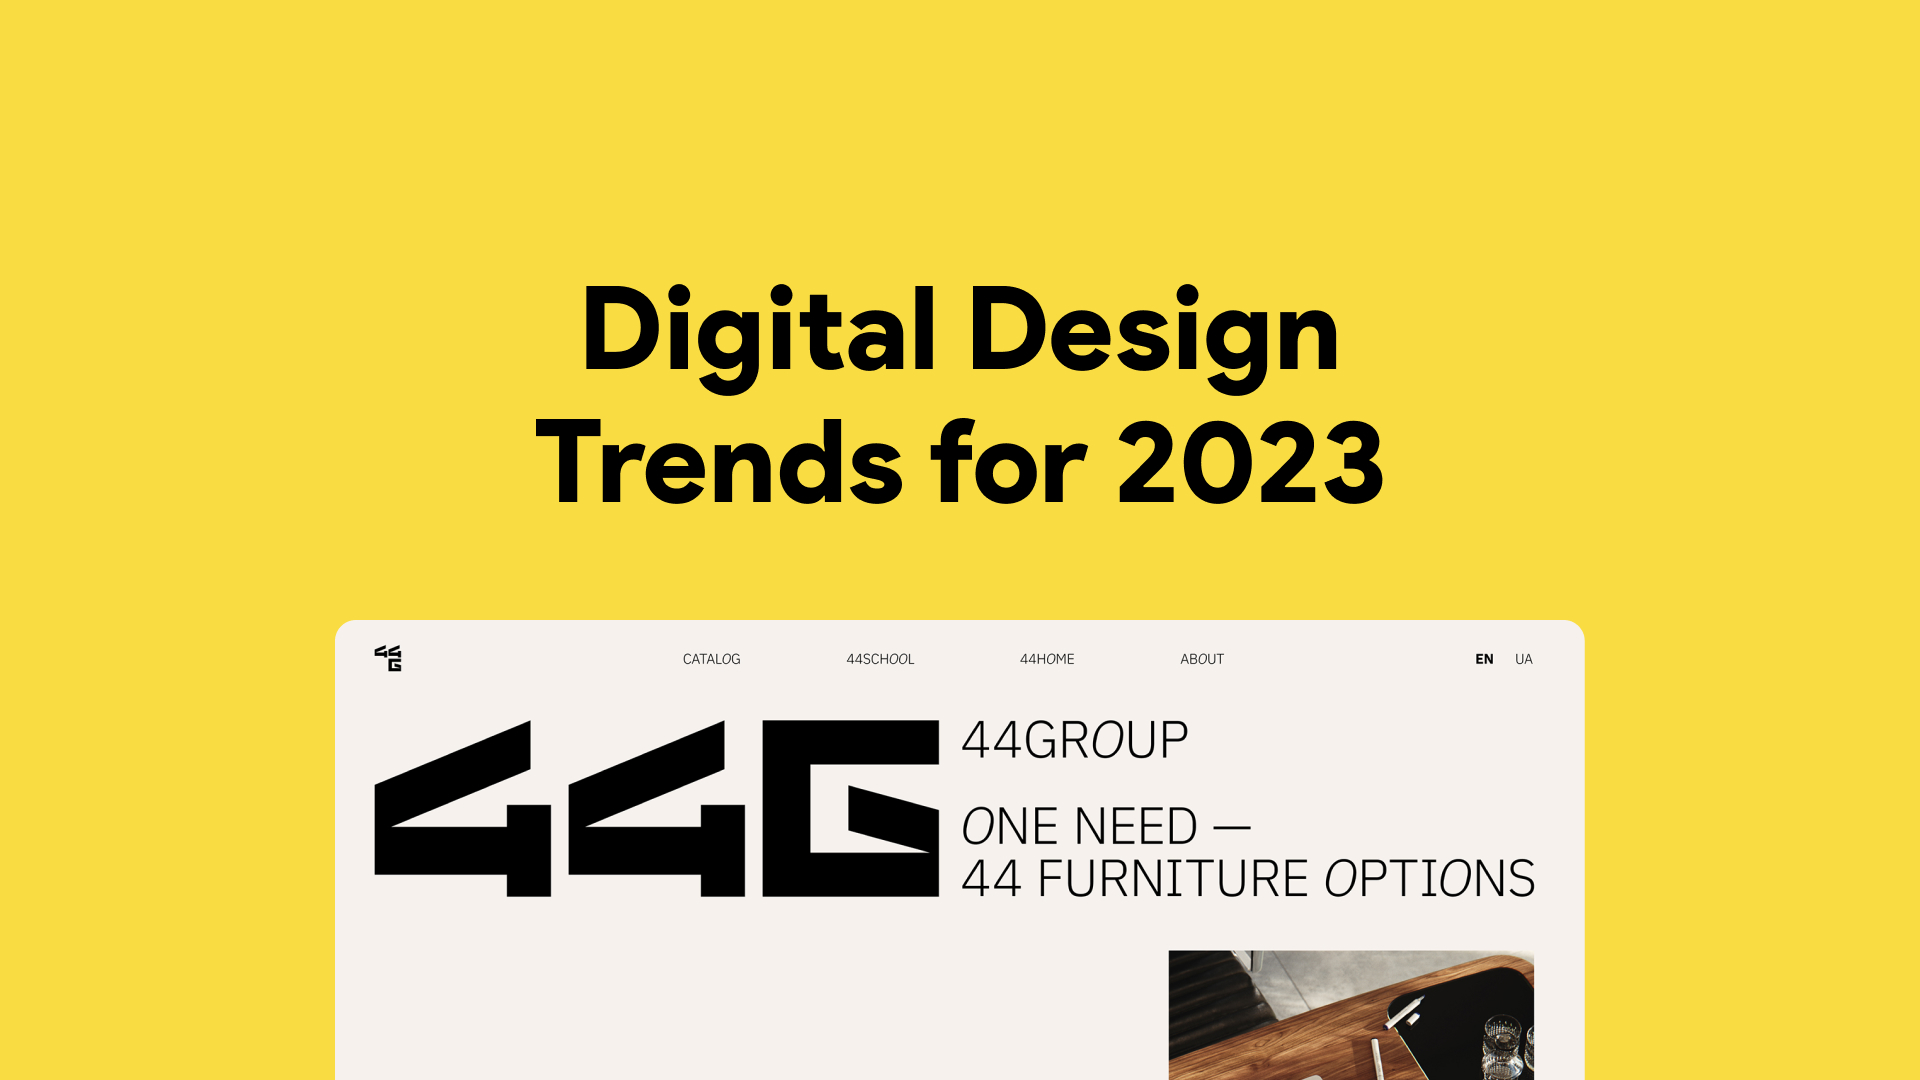 Top Design Trends for 2023: What to Expect in Digital Design - Qubstudio